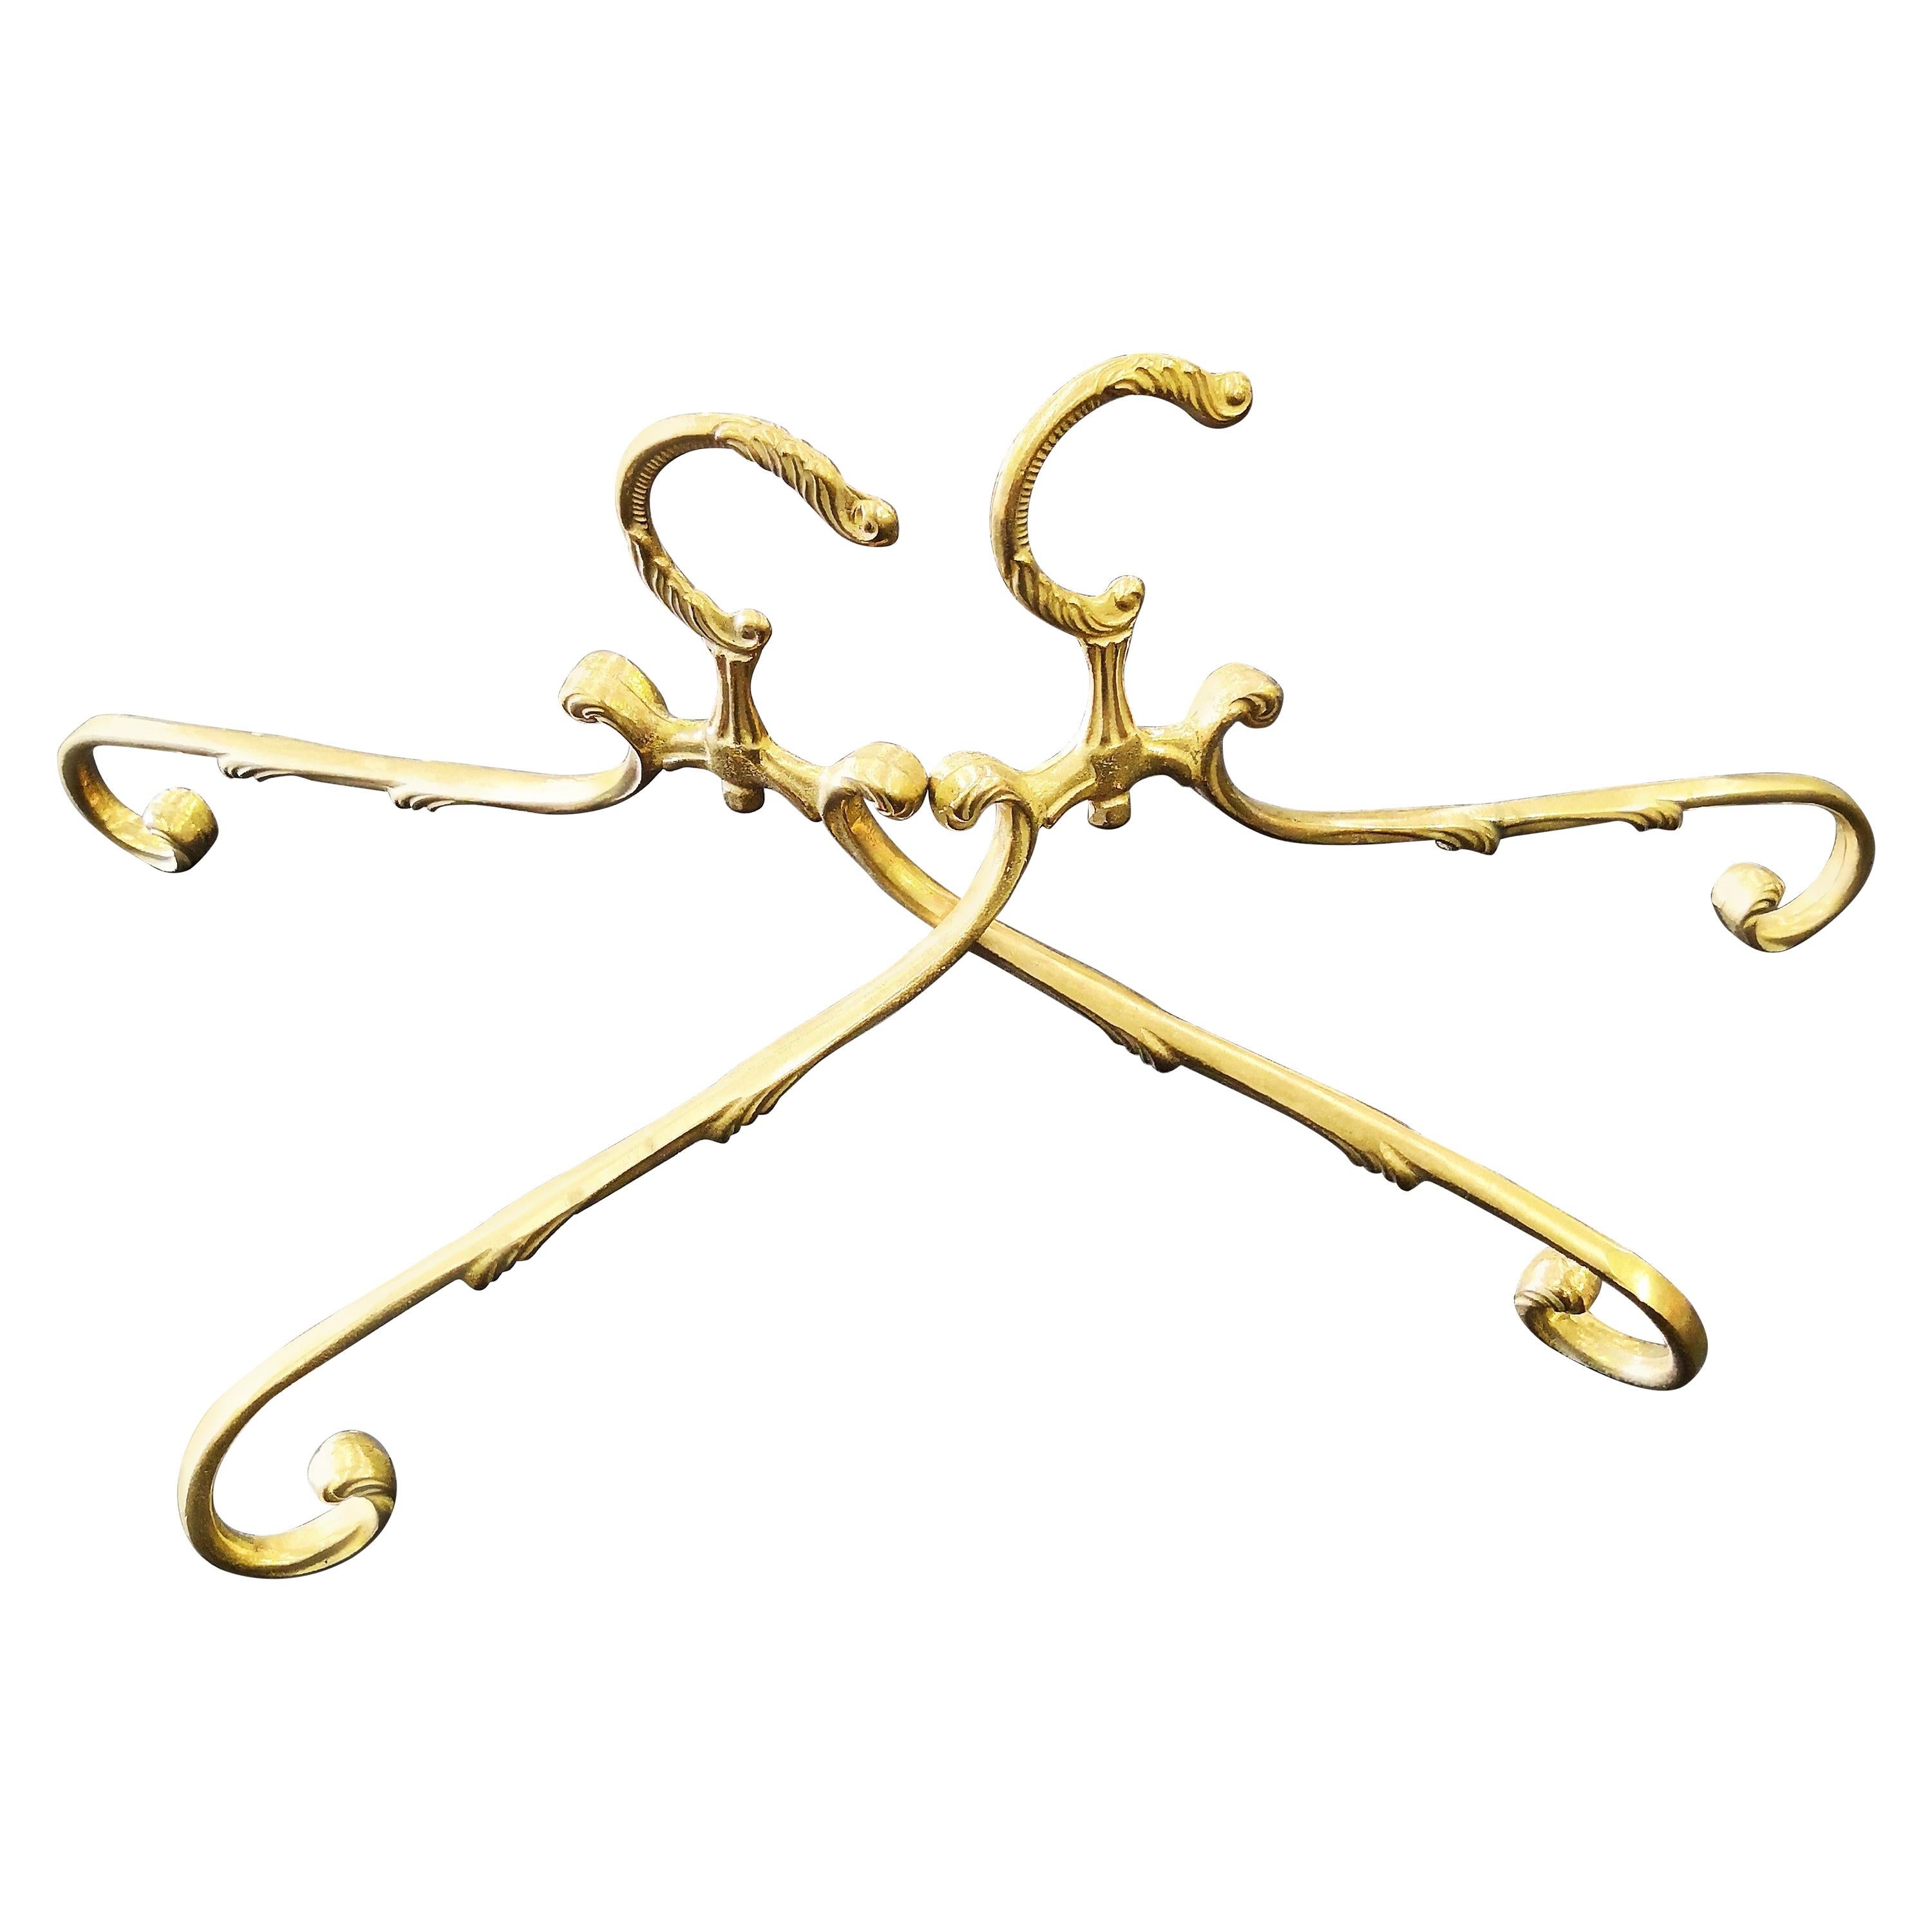 1980s Italian Hollywood Regency Neoclassical Solid Brass Coat Hangers For Sale